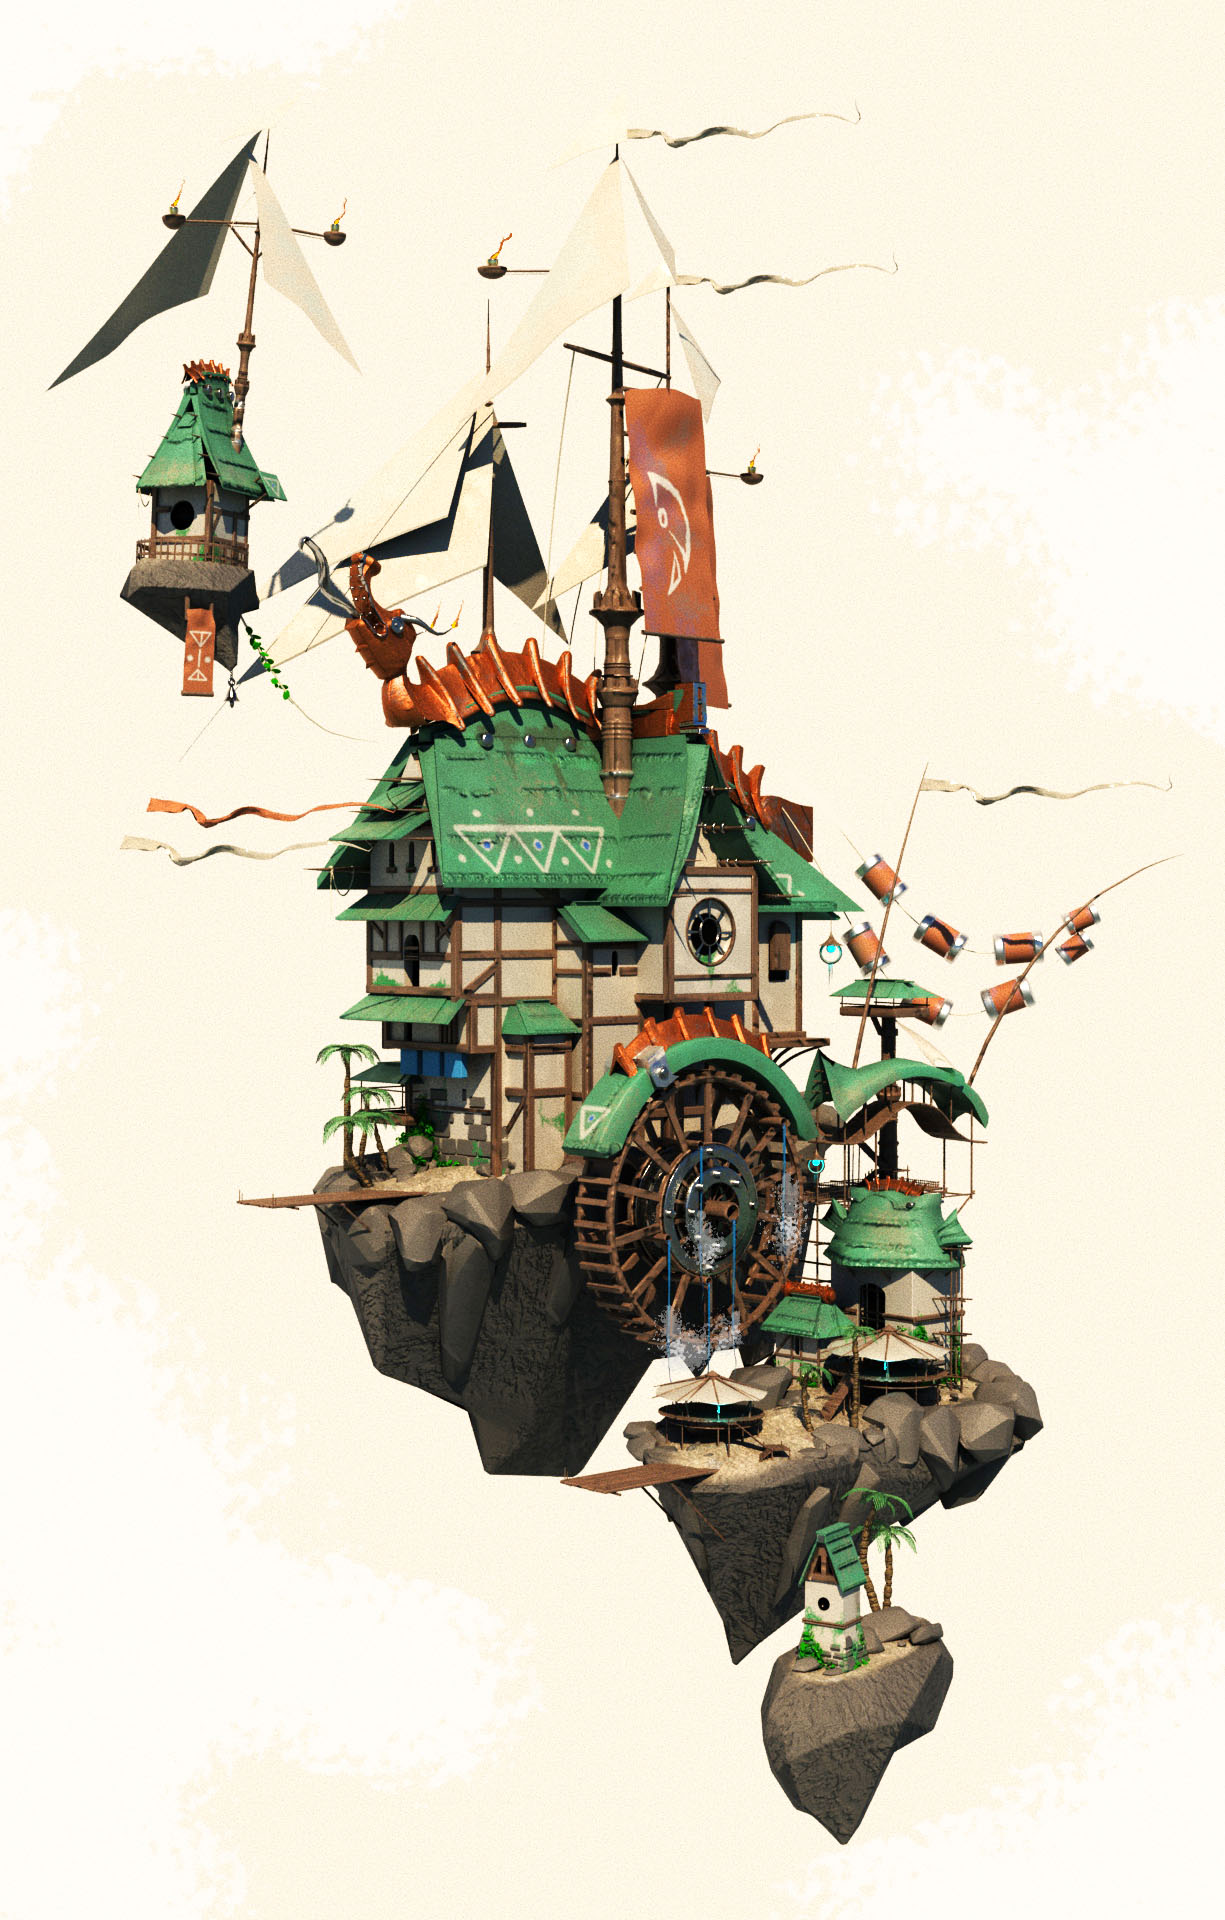 Floating Town